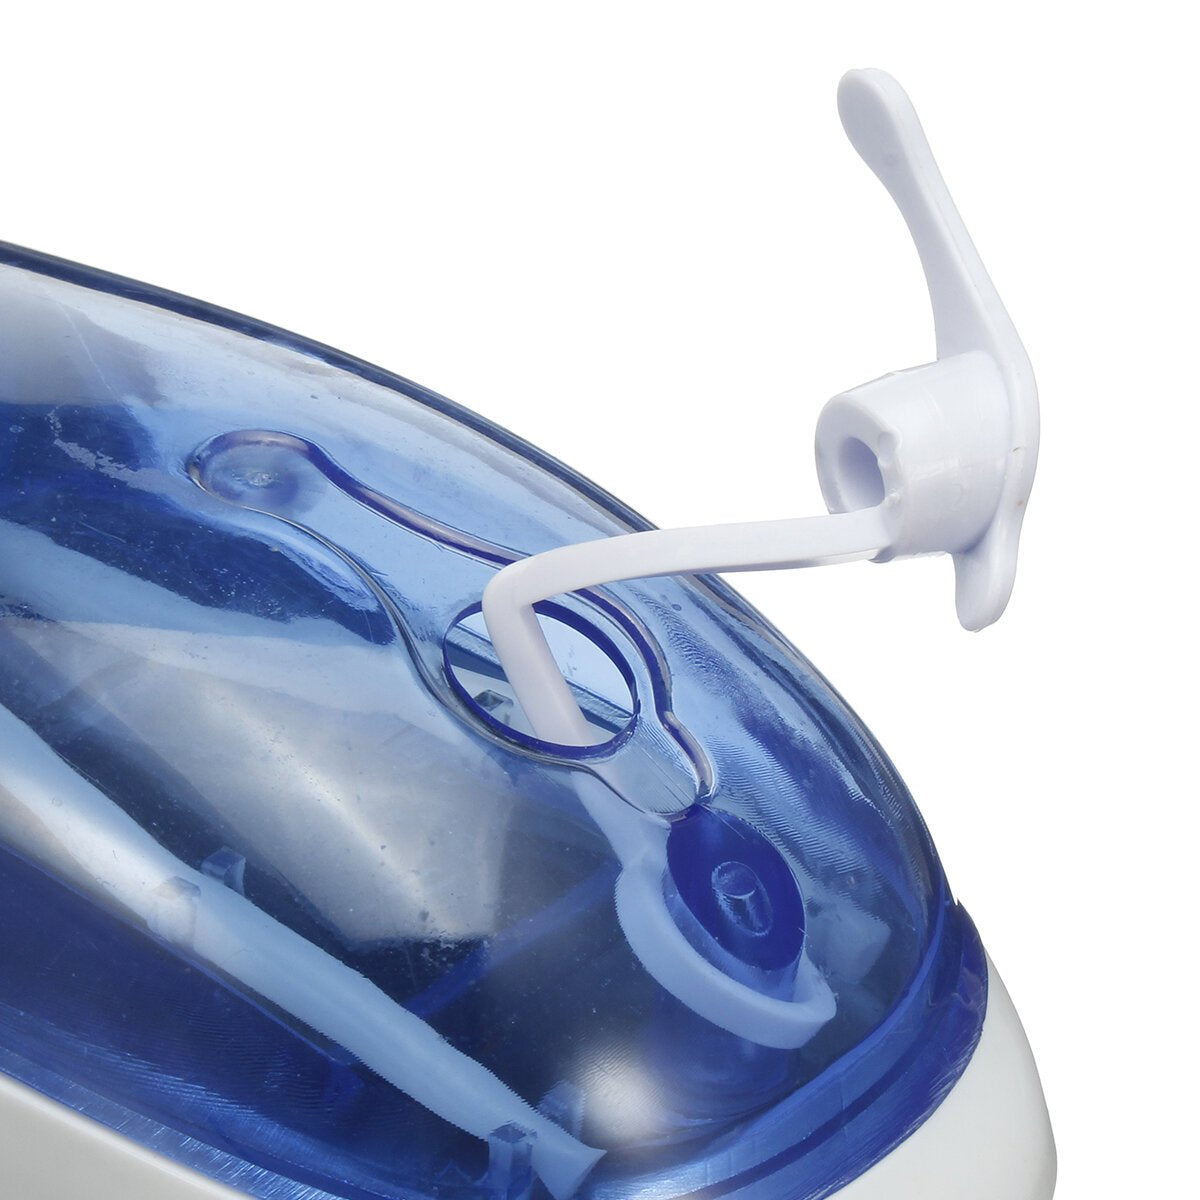 800W Household Handheld Steam Iron Portable Electric Garment Cleaner for Home Travel